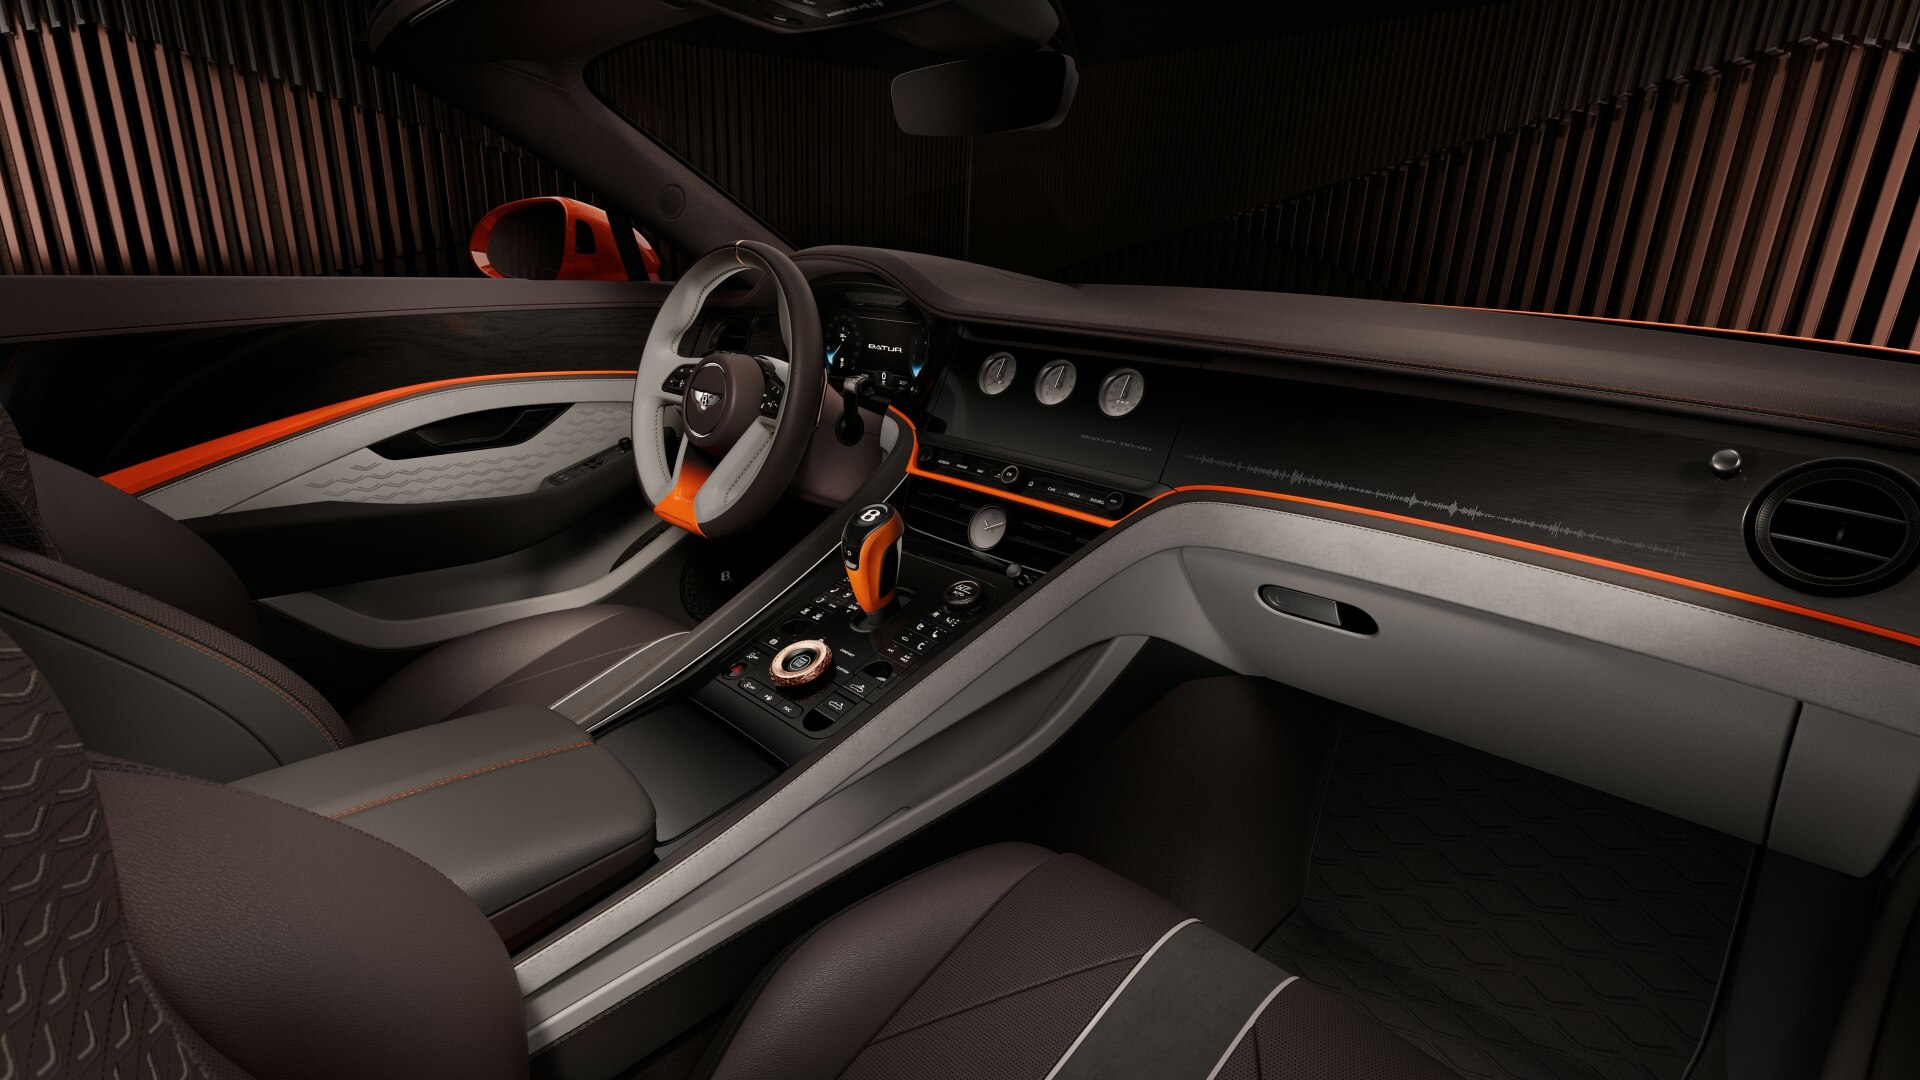 The Interior, Steering, Dashboard, And Central Console Of The New Bentley Batur Convertible